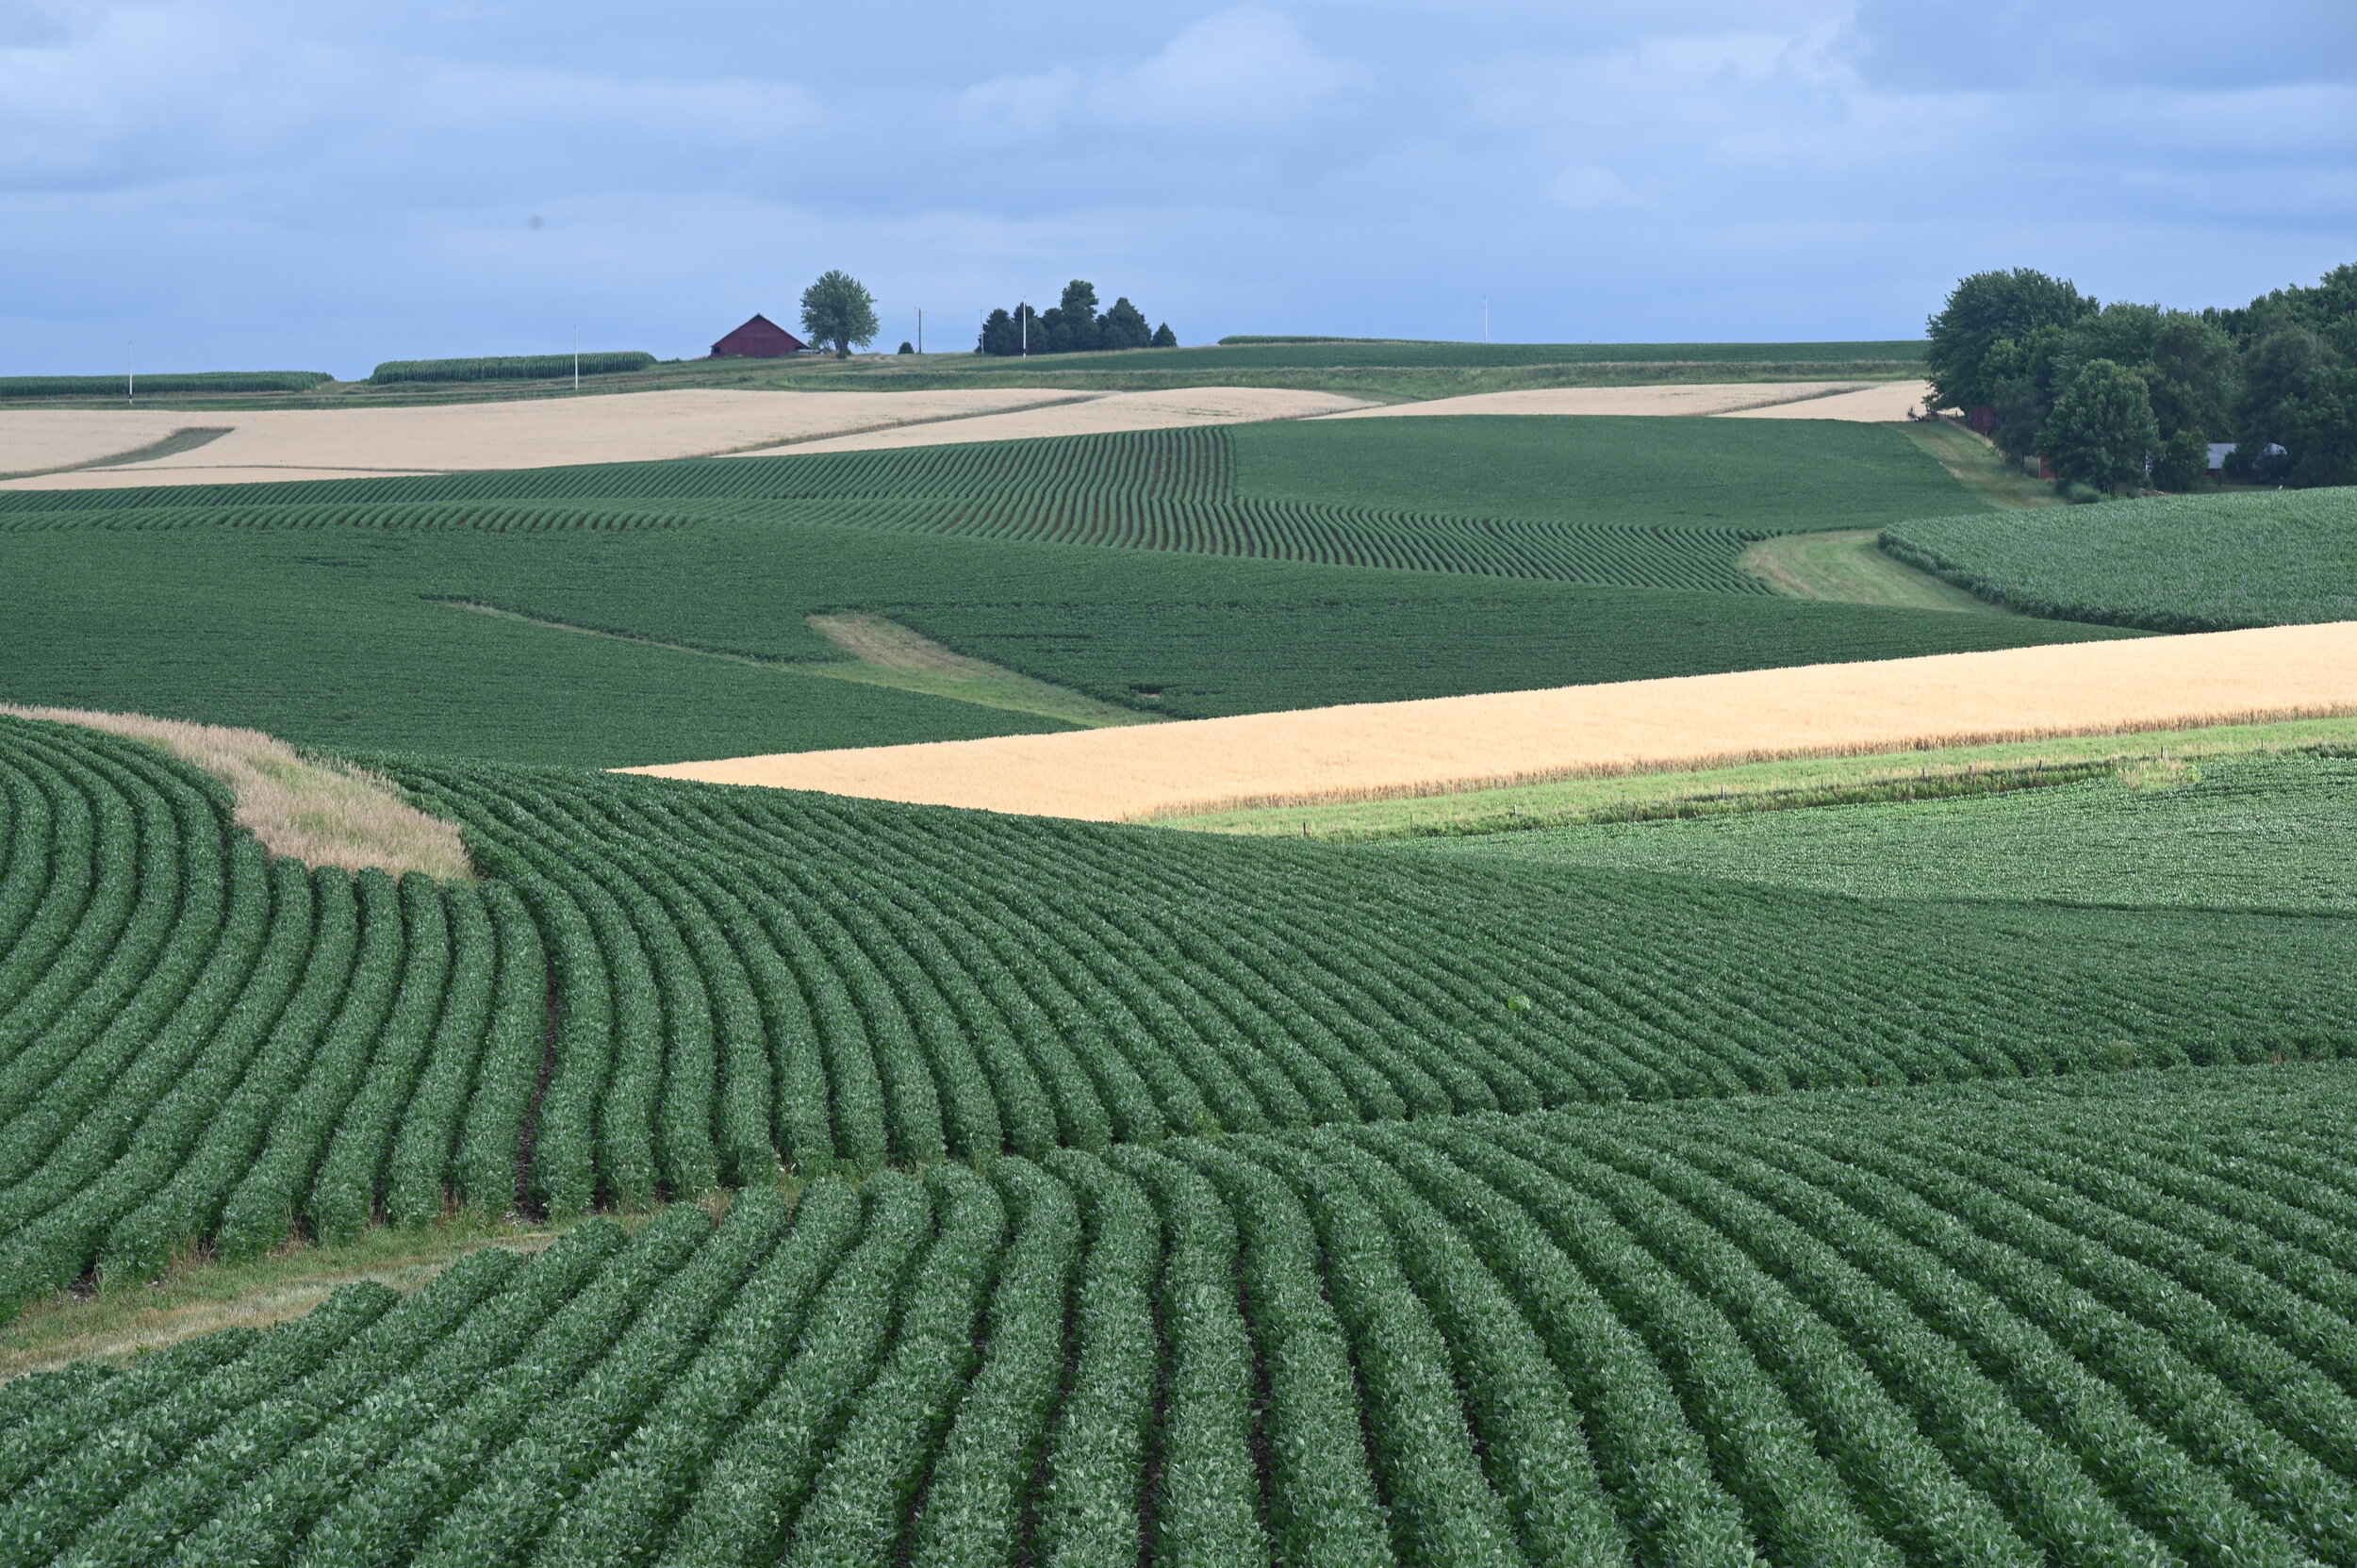  Soybeans, corn and other crops make a patchwork painting on rolling hills near Dedham. 